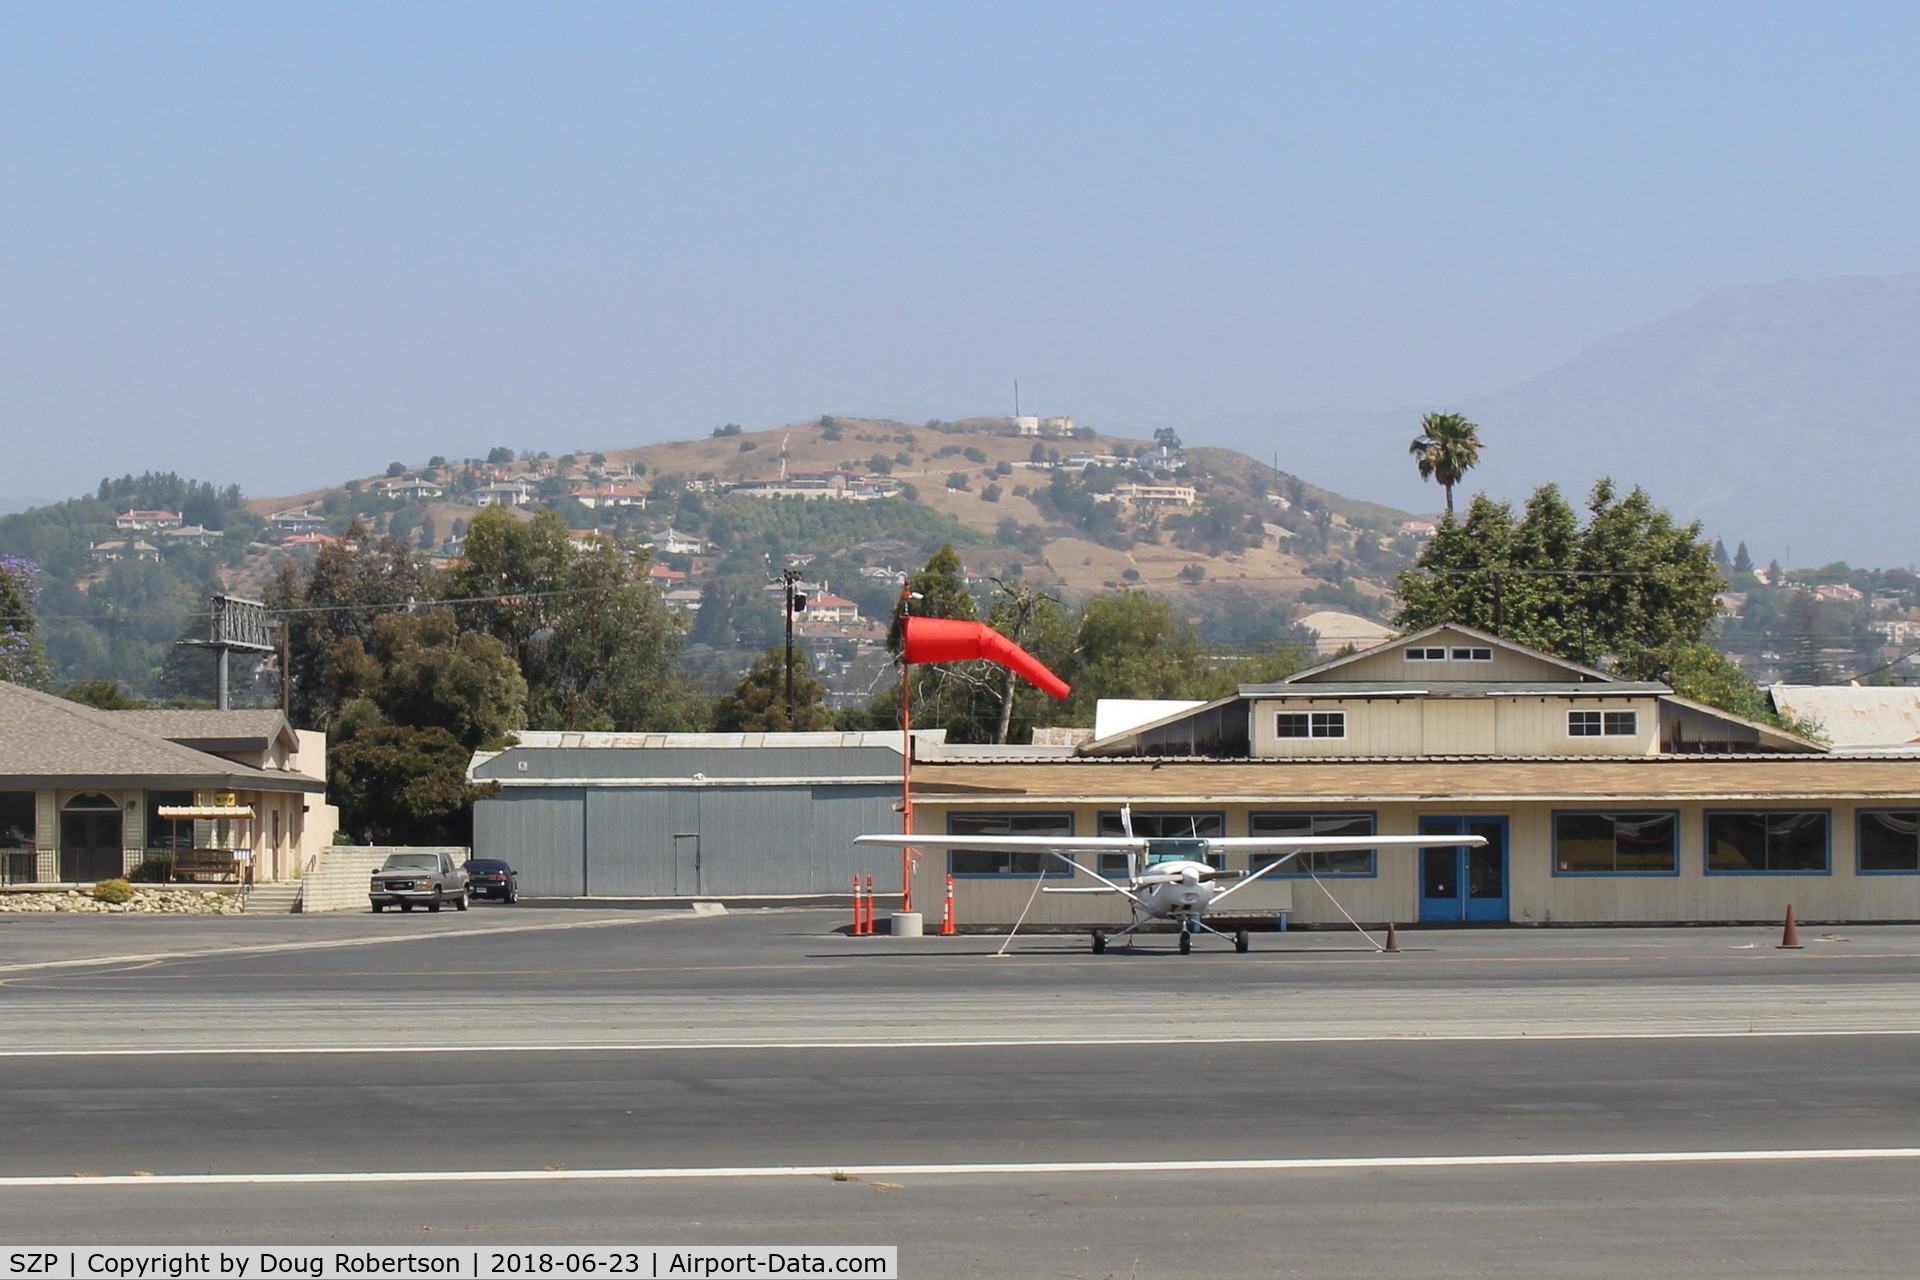 Santa Paula Airport (SZP) - New and welcome Windsock, now visible from CP Aviation Office and Ramp and all of transient Ramp. Airport now has three windsocks & revolving tetrahedron near Helipad.